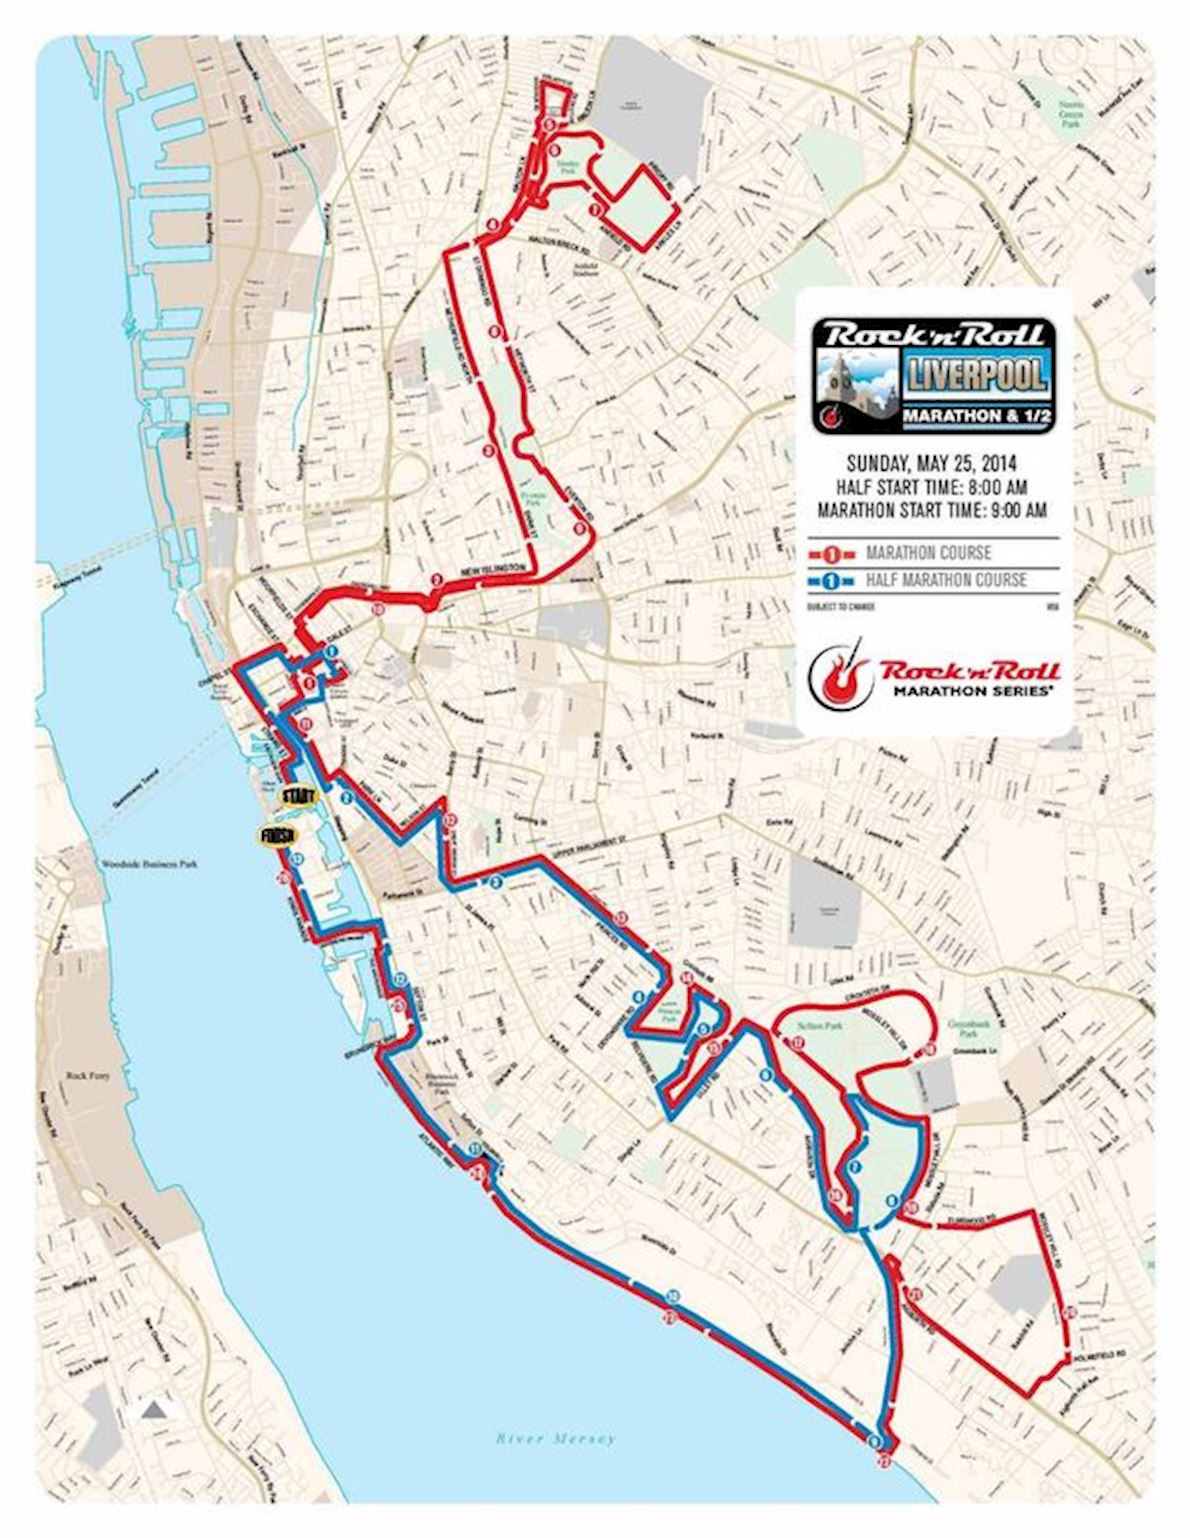 Rock ‘n’ Roll Liverpool Route Map